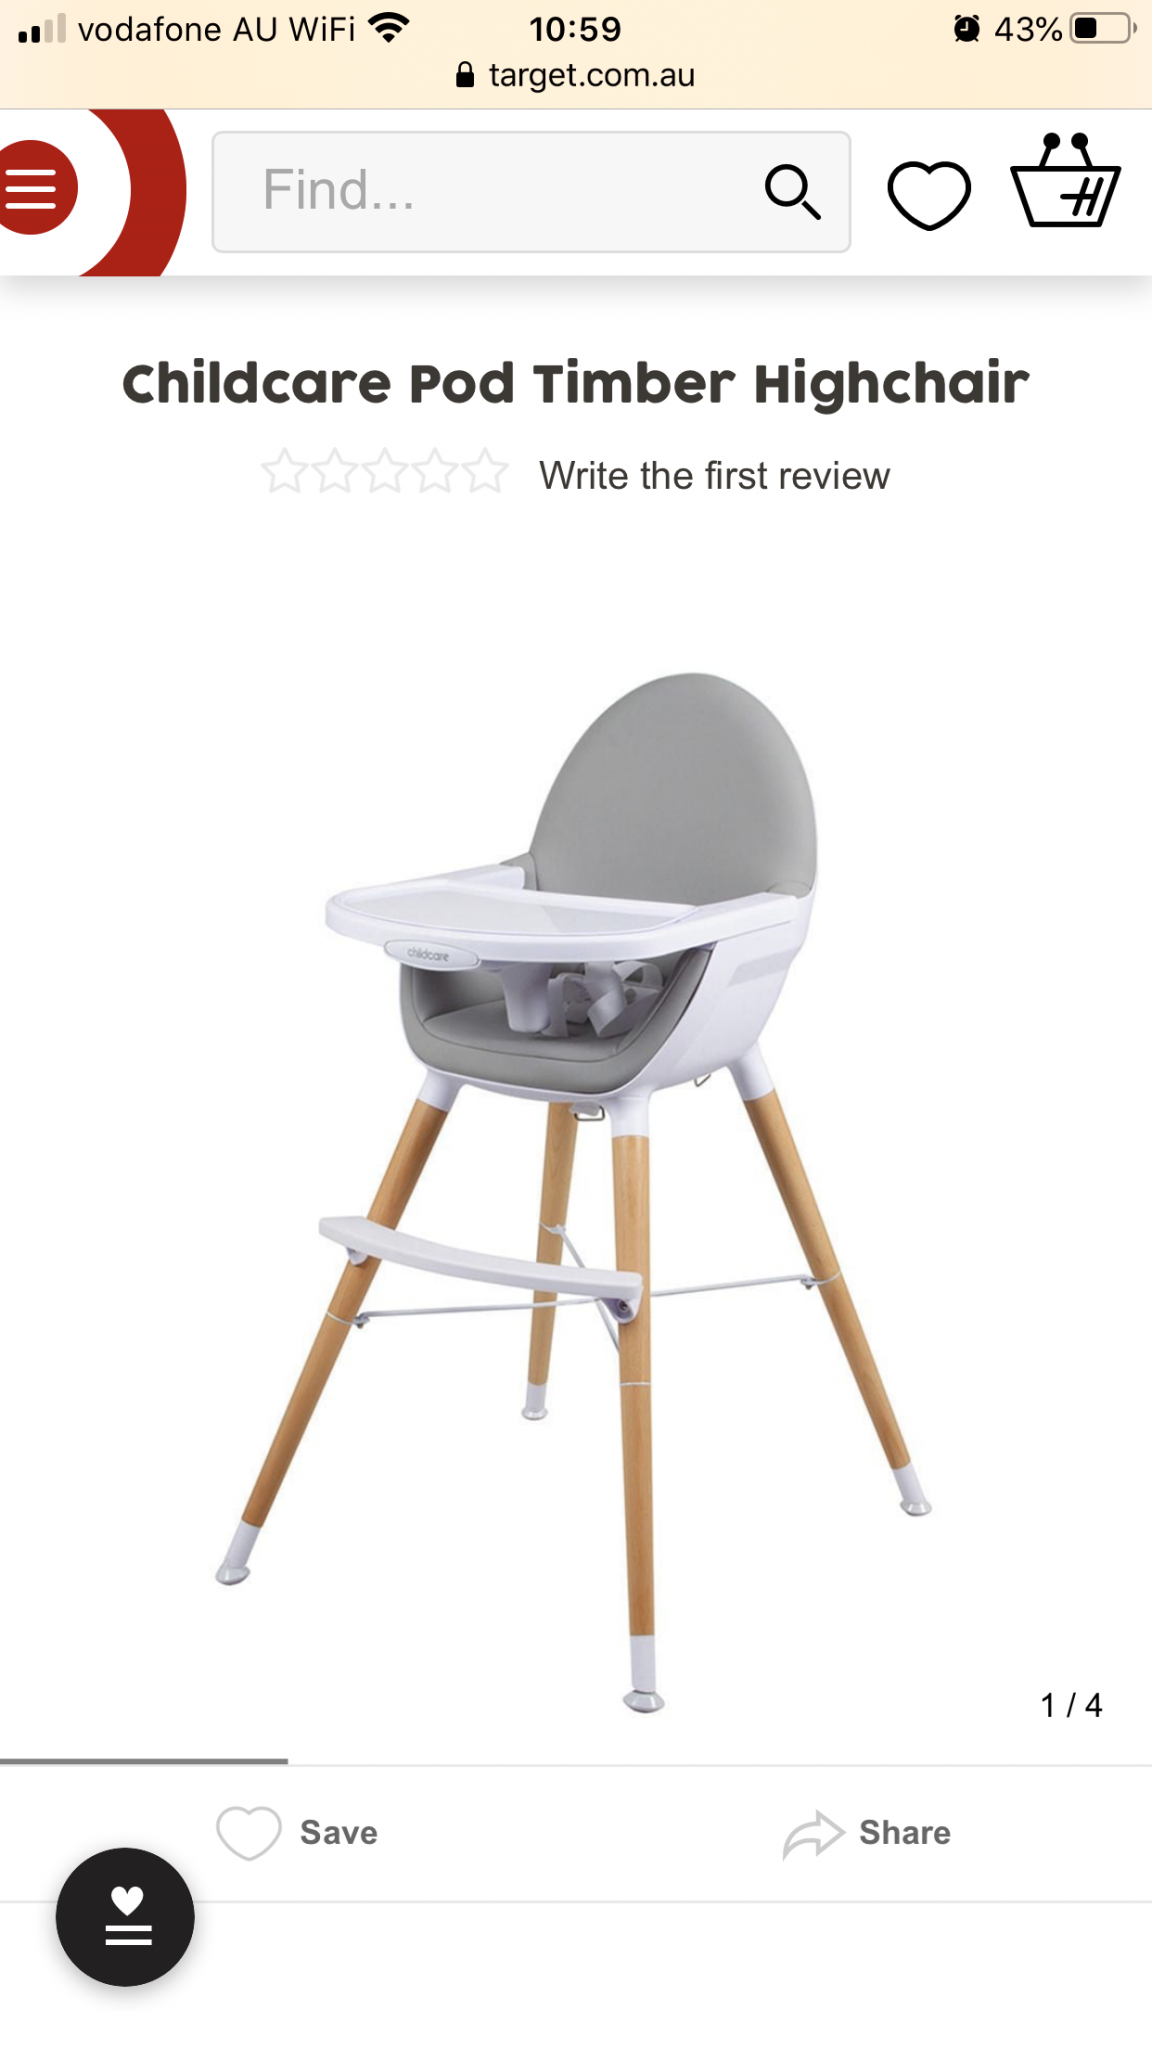 Childcare Pod Timber Highchair